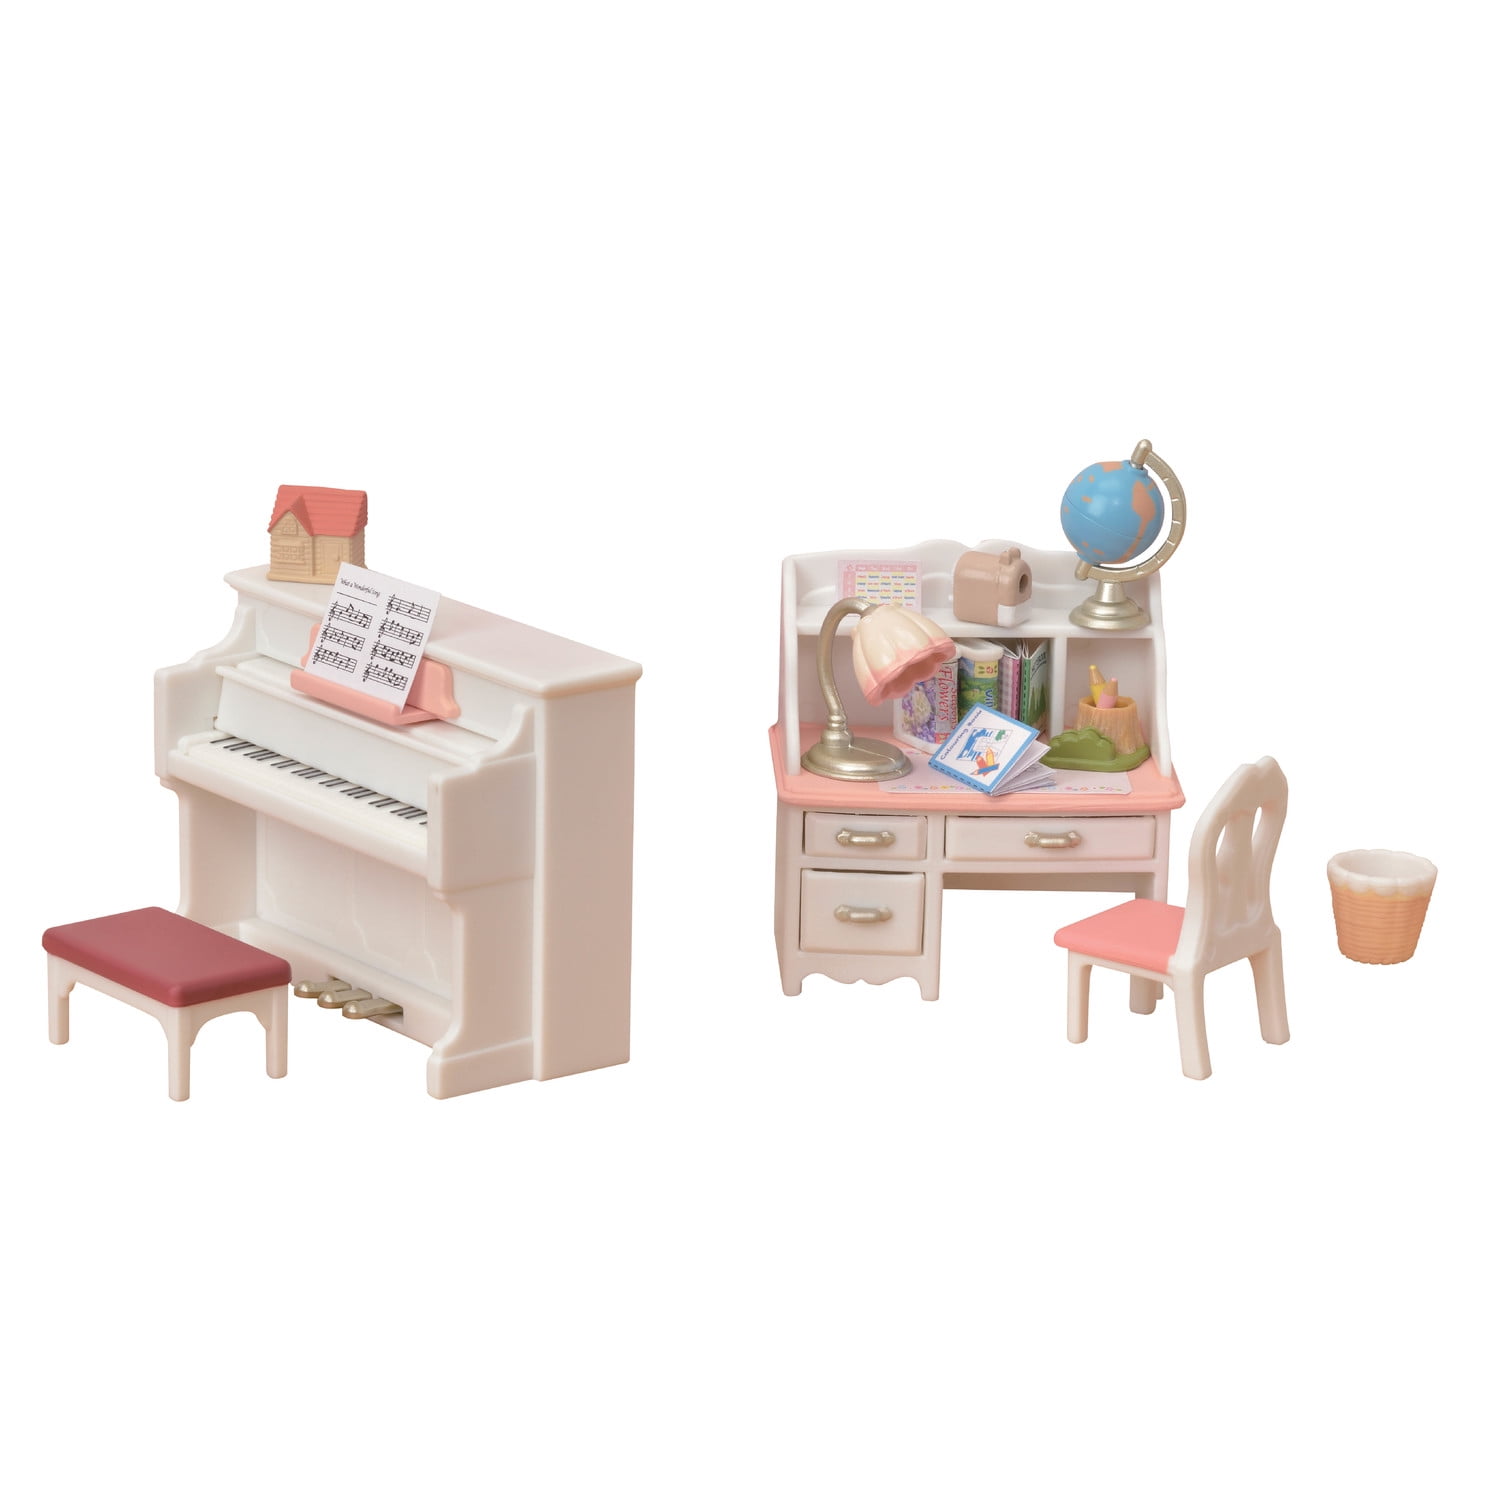 Calico Critters Deluxe Kozy Kitchen Play Set Fridge Furniture And Accessories 